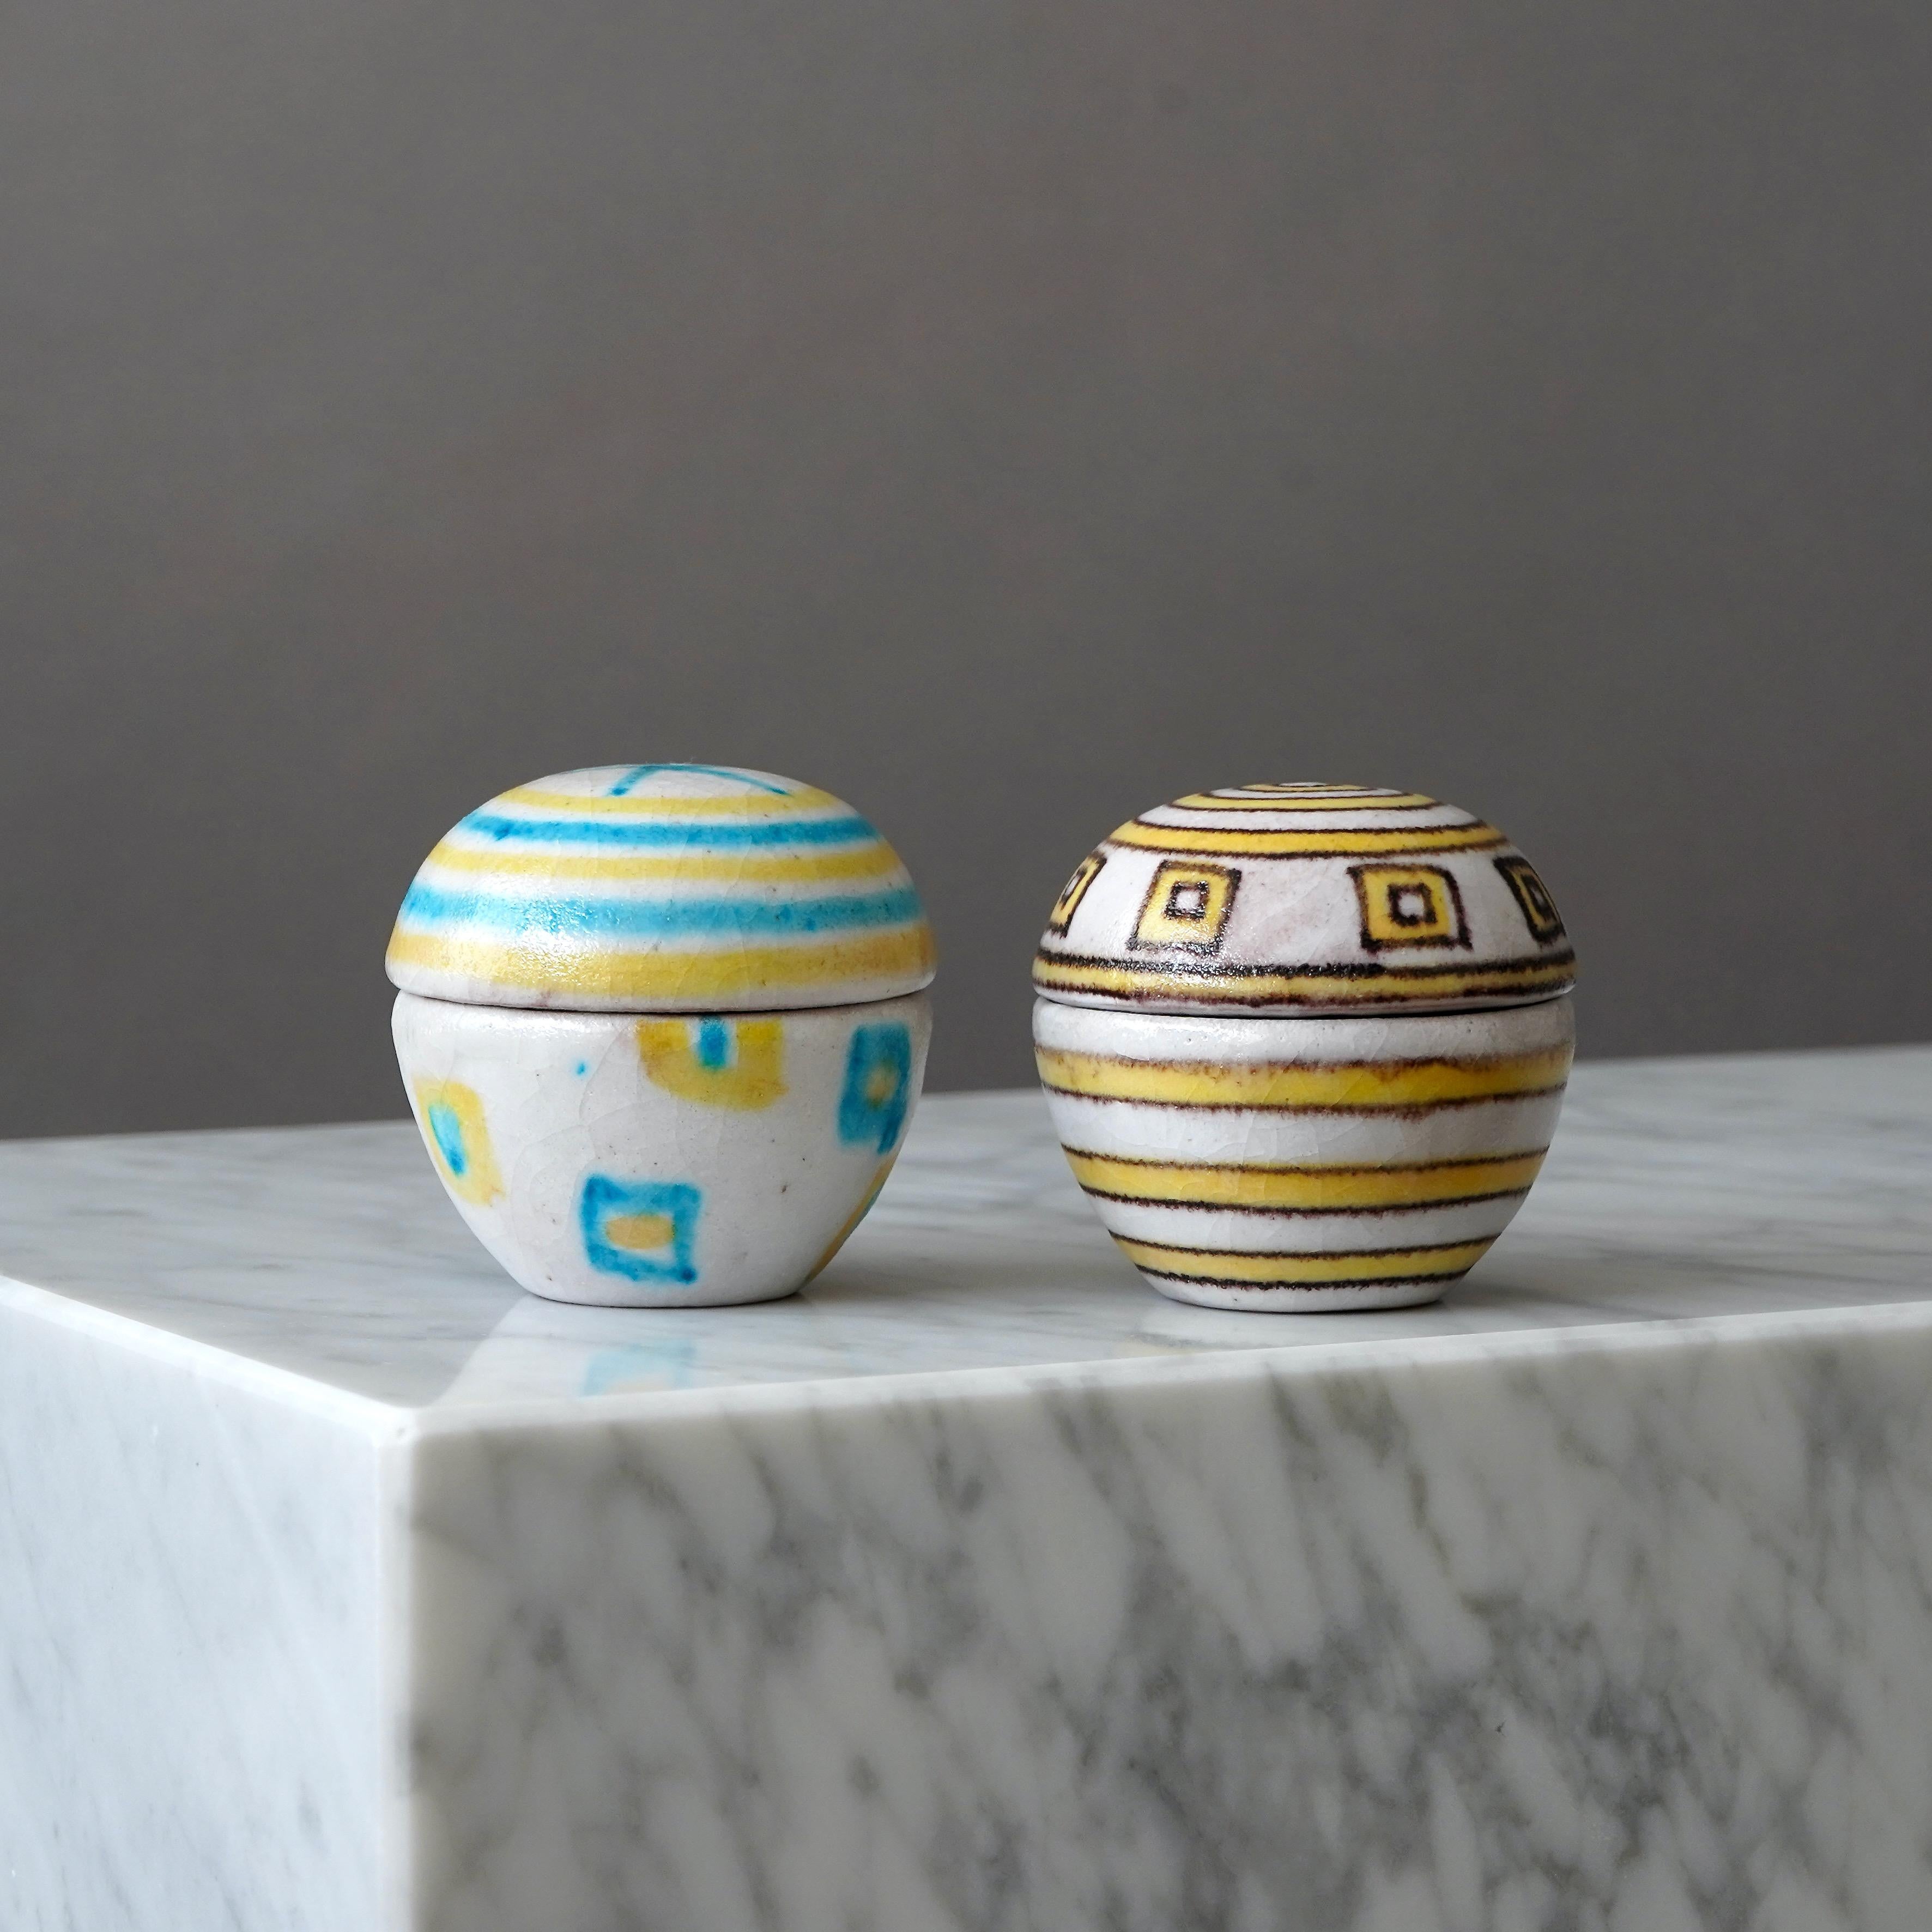 20th Century Unique Lidded Ceramic Boxes by Guido Gambone. Florence, Italy, 1950s